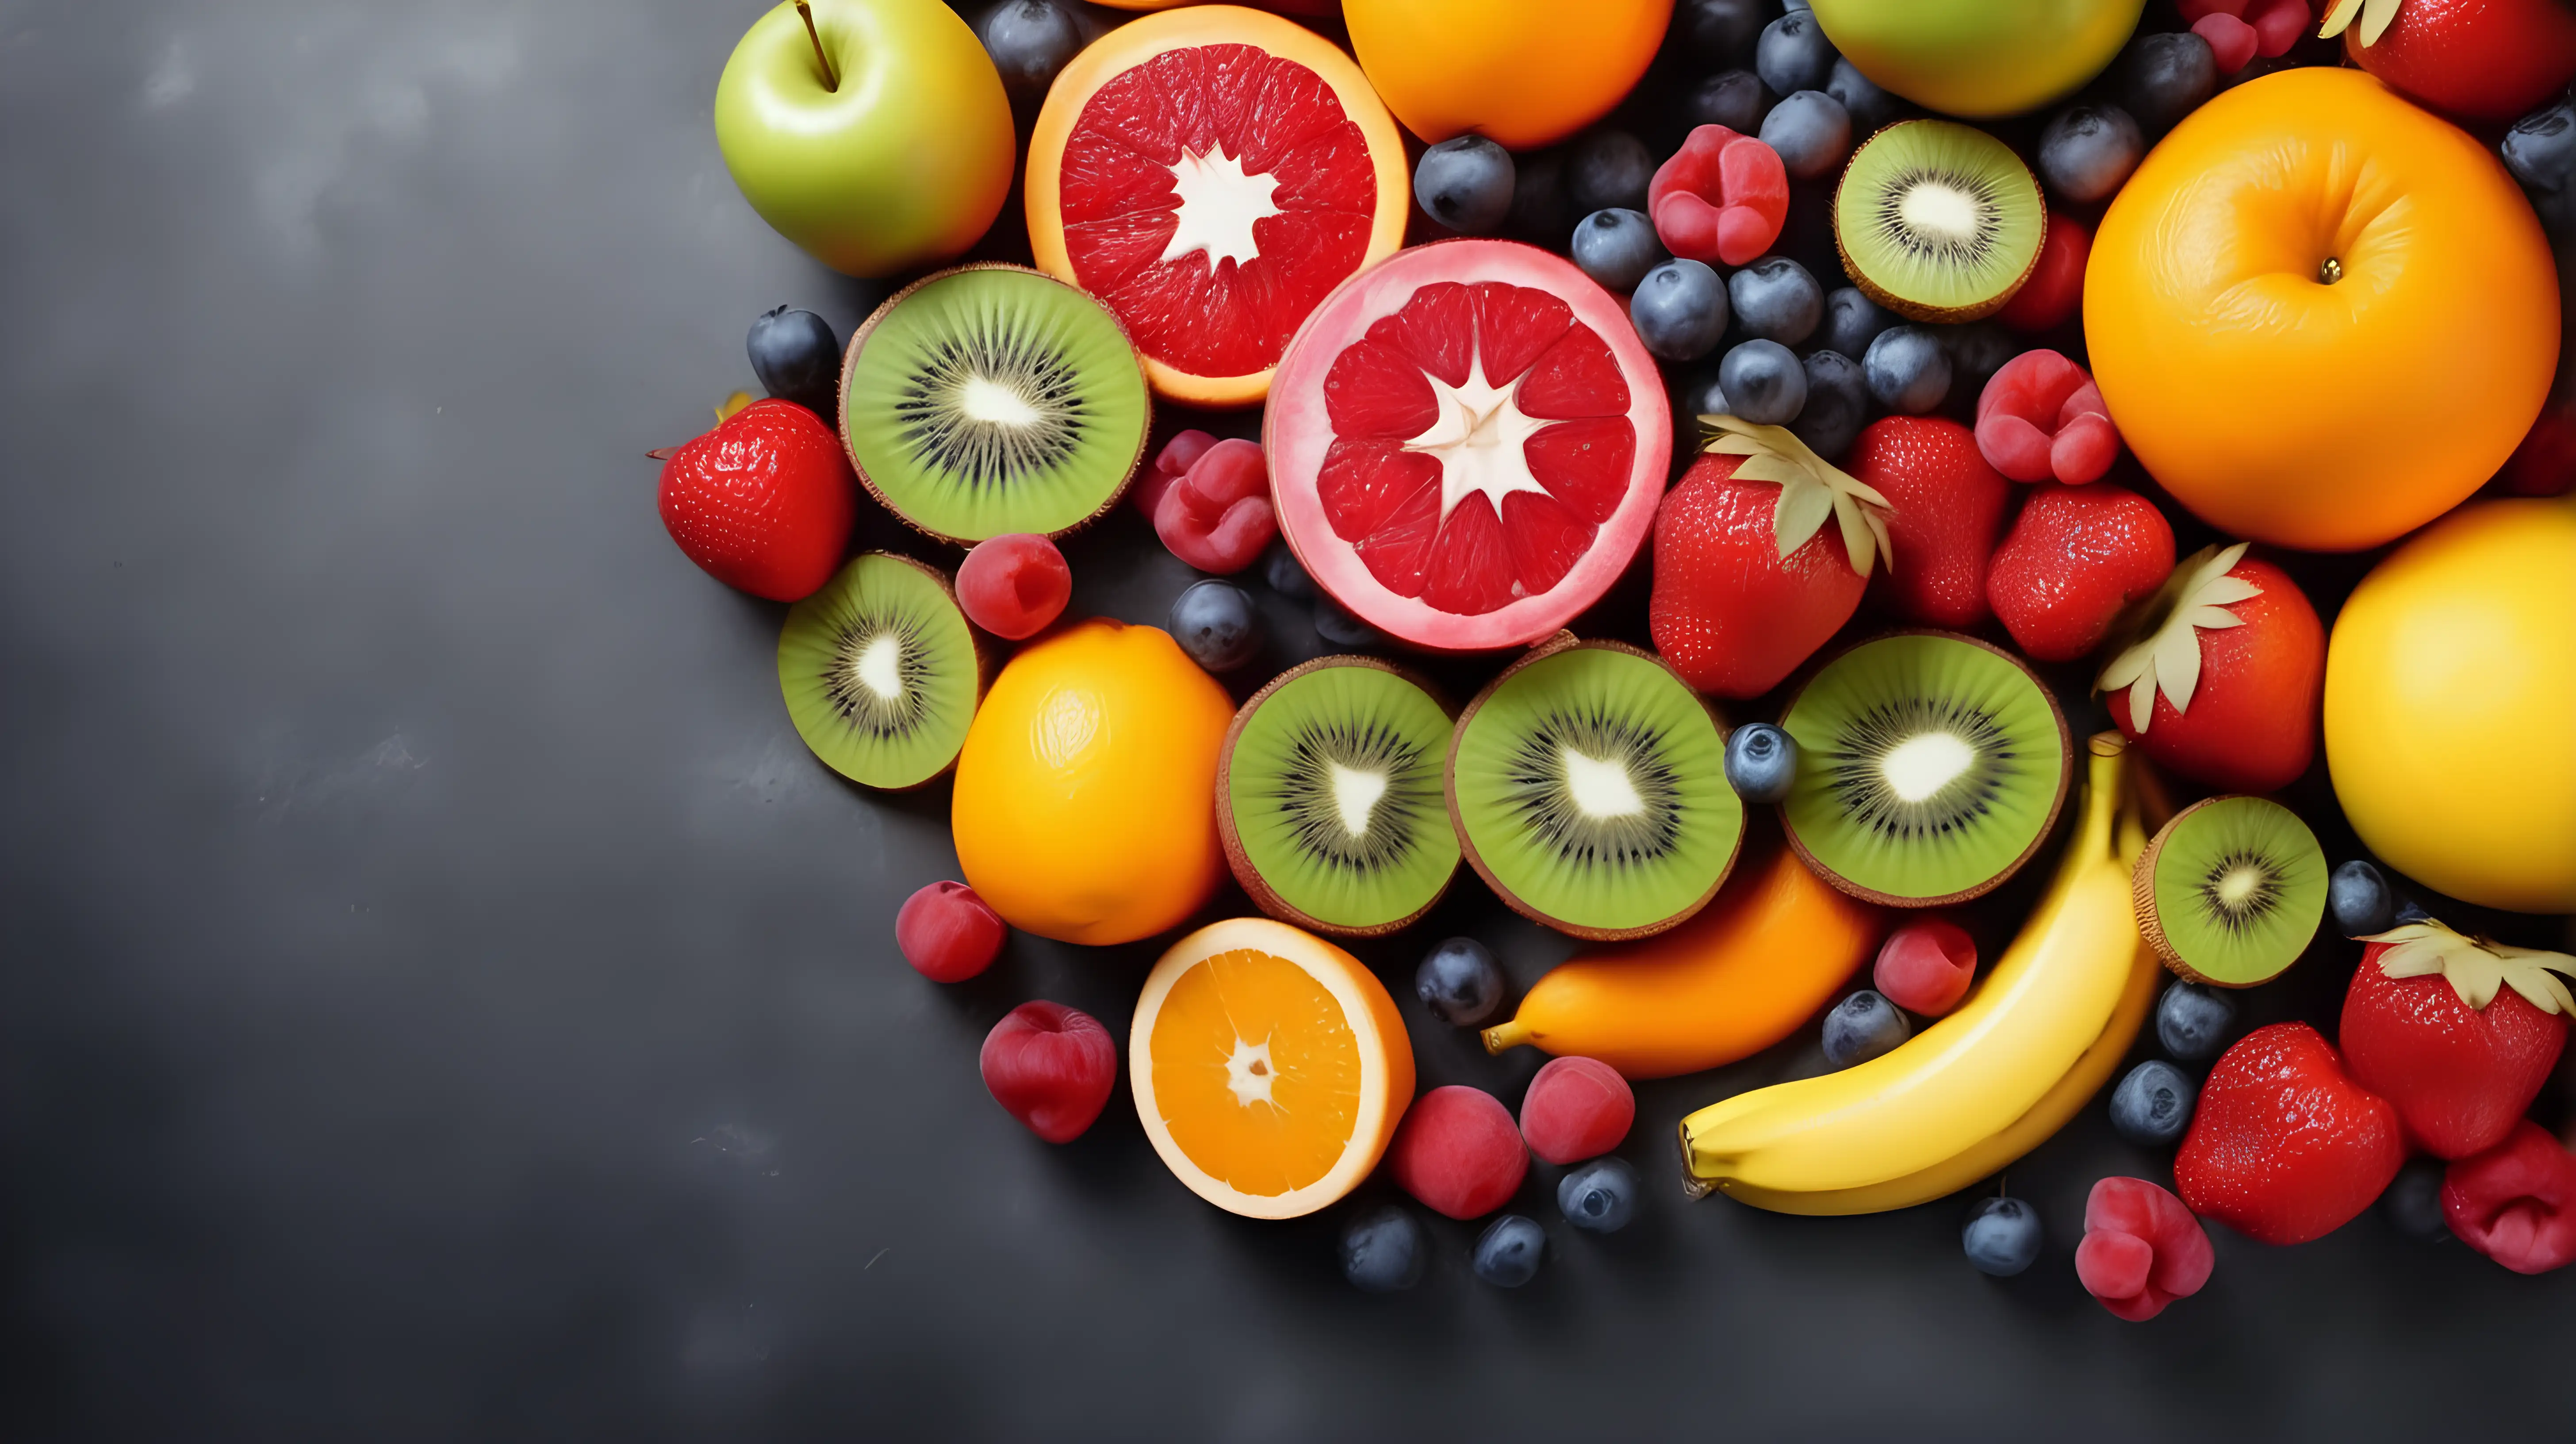 Colorful Fresh Fruits Arrangement with Ample Copy Space